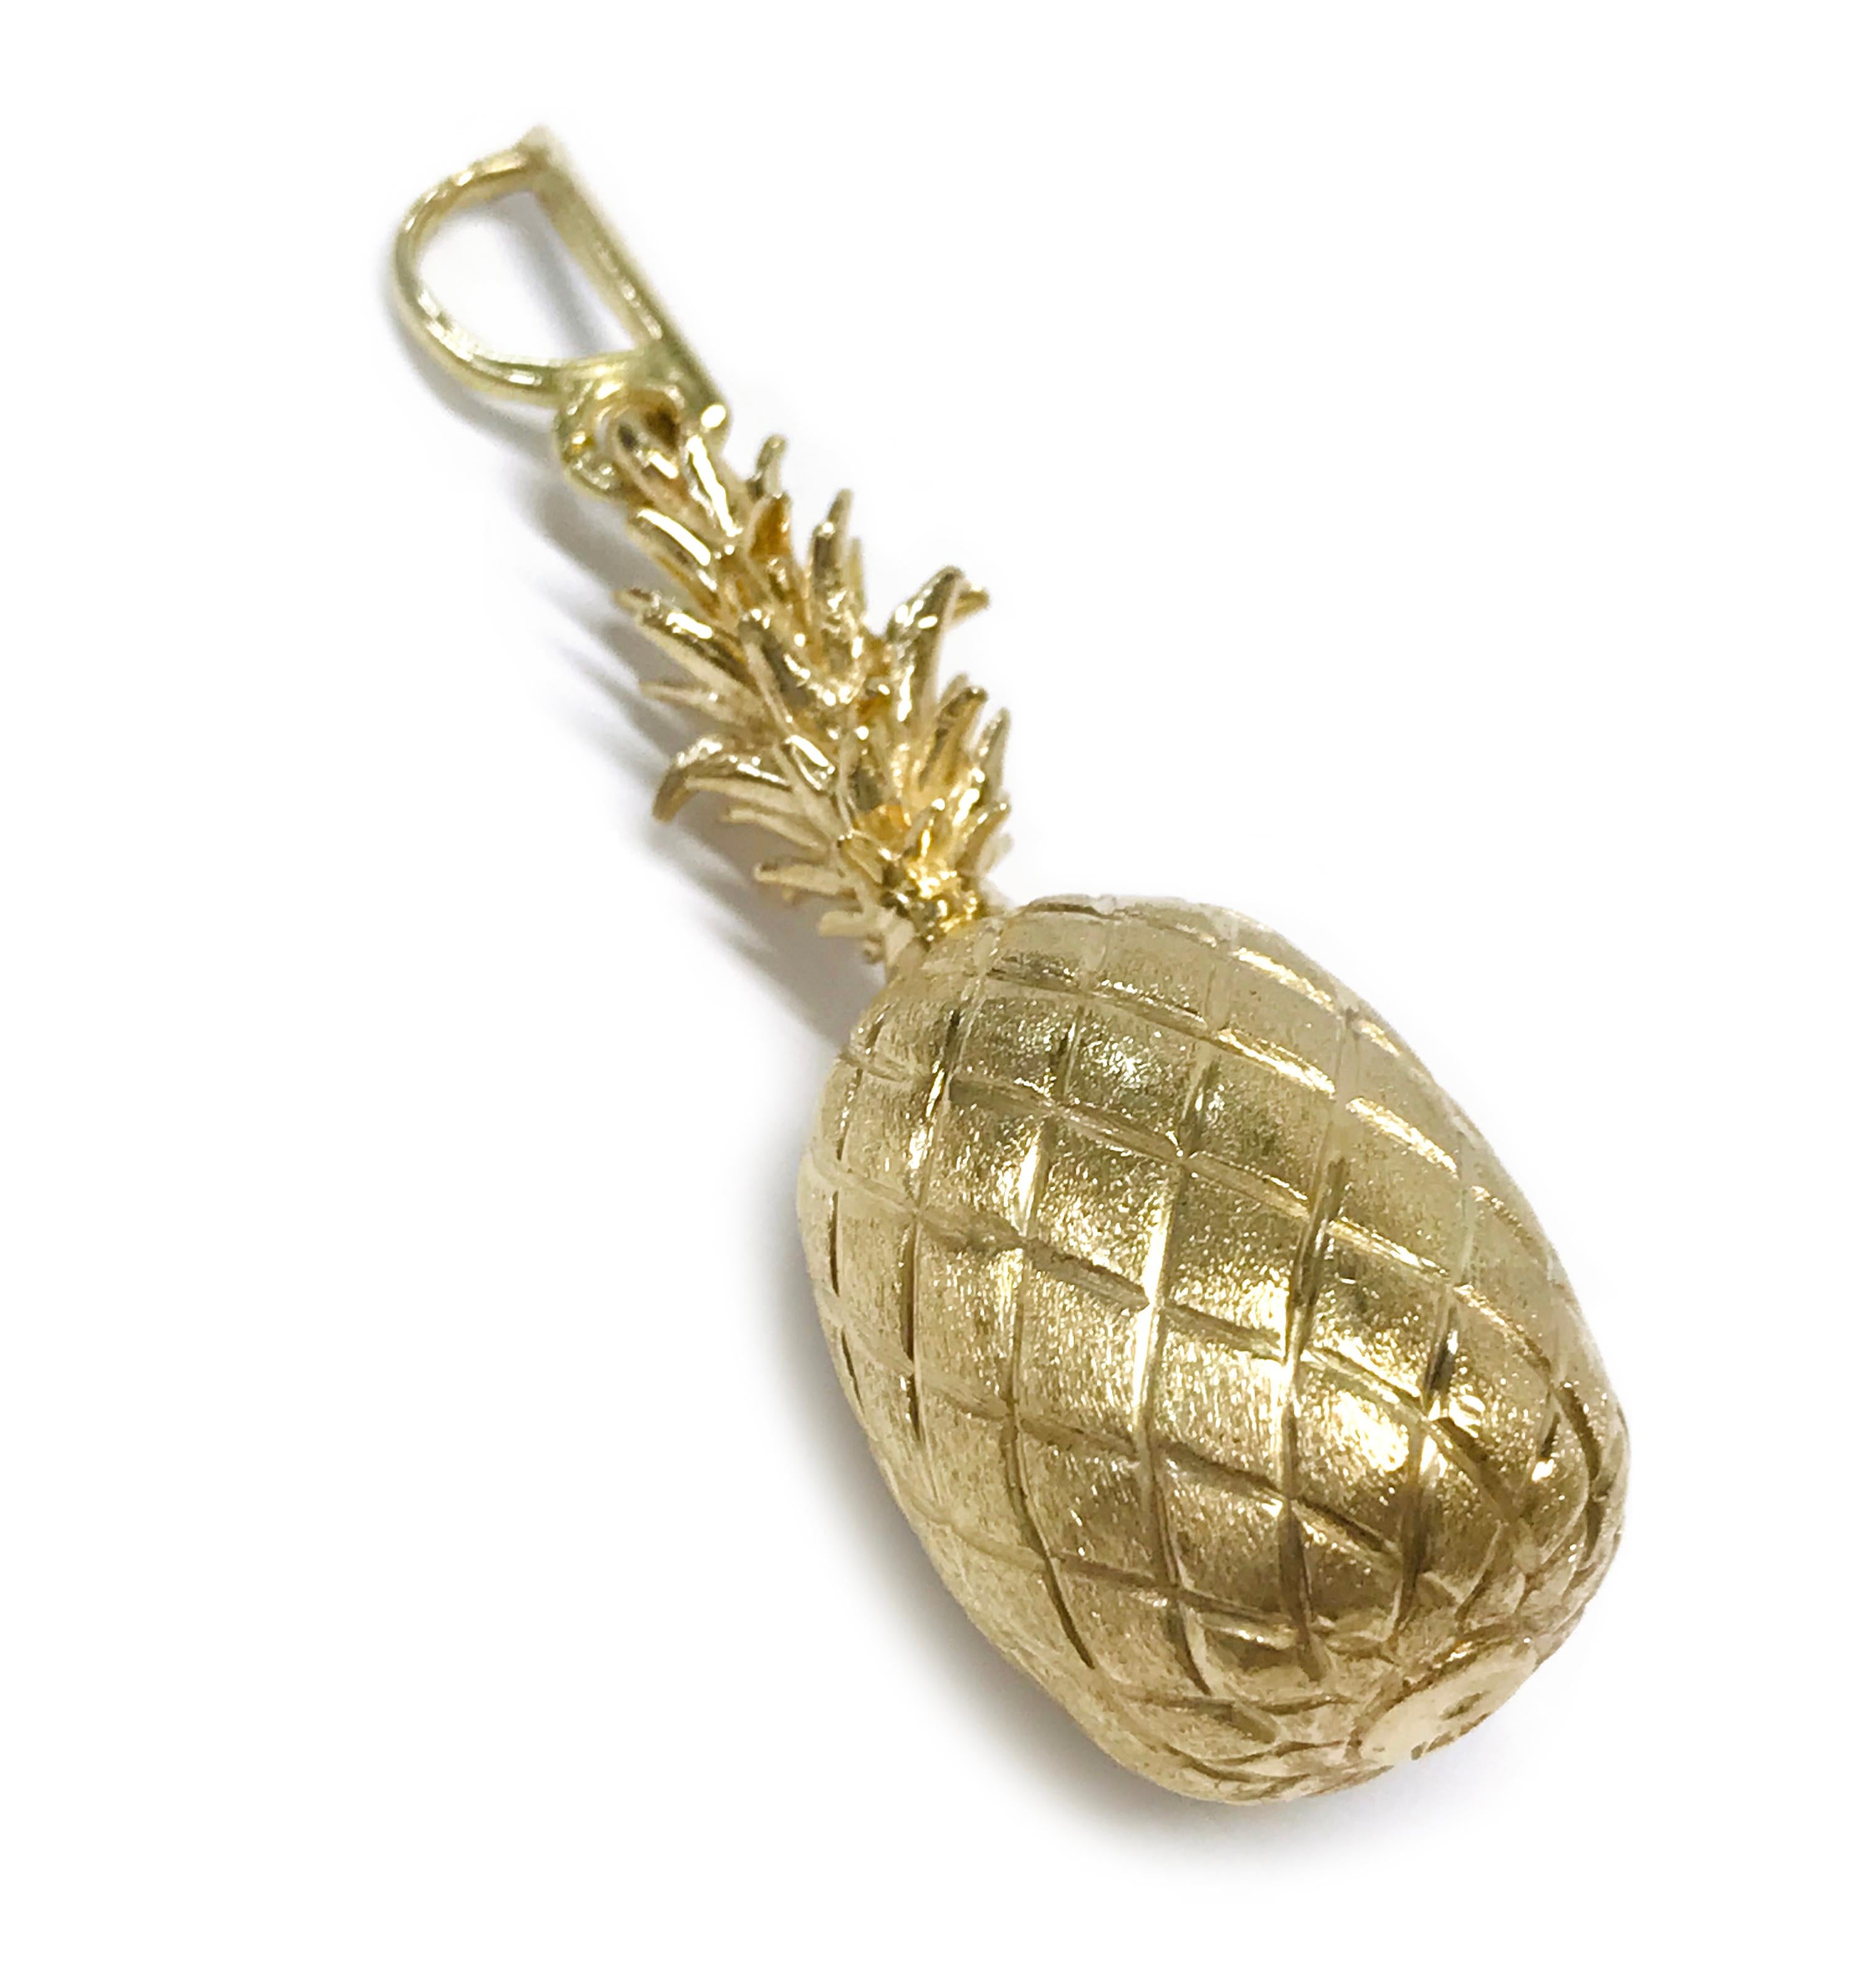 14 Karat Gold Heavyweight Pineapple Pendant. This is an exceptionally well-crafted pendant/charm. The realistic pineapple design has the fruit outlines with a Florentine finish and the crown offers texture and contrast. The pendant measures 0.66mm